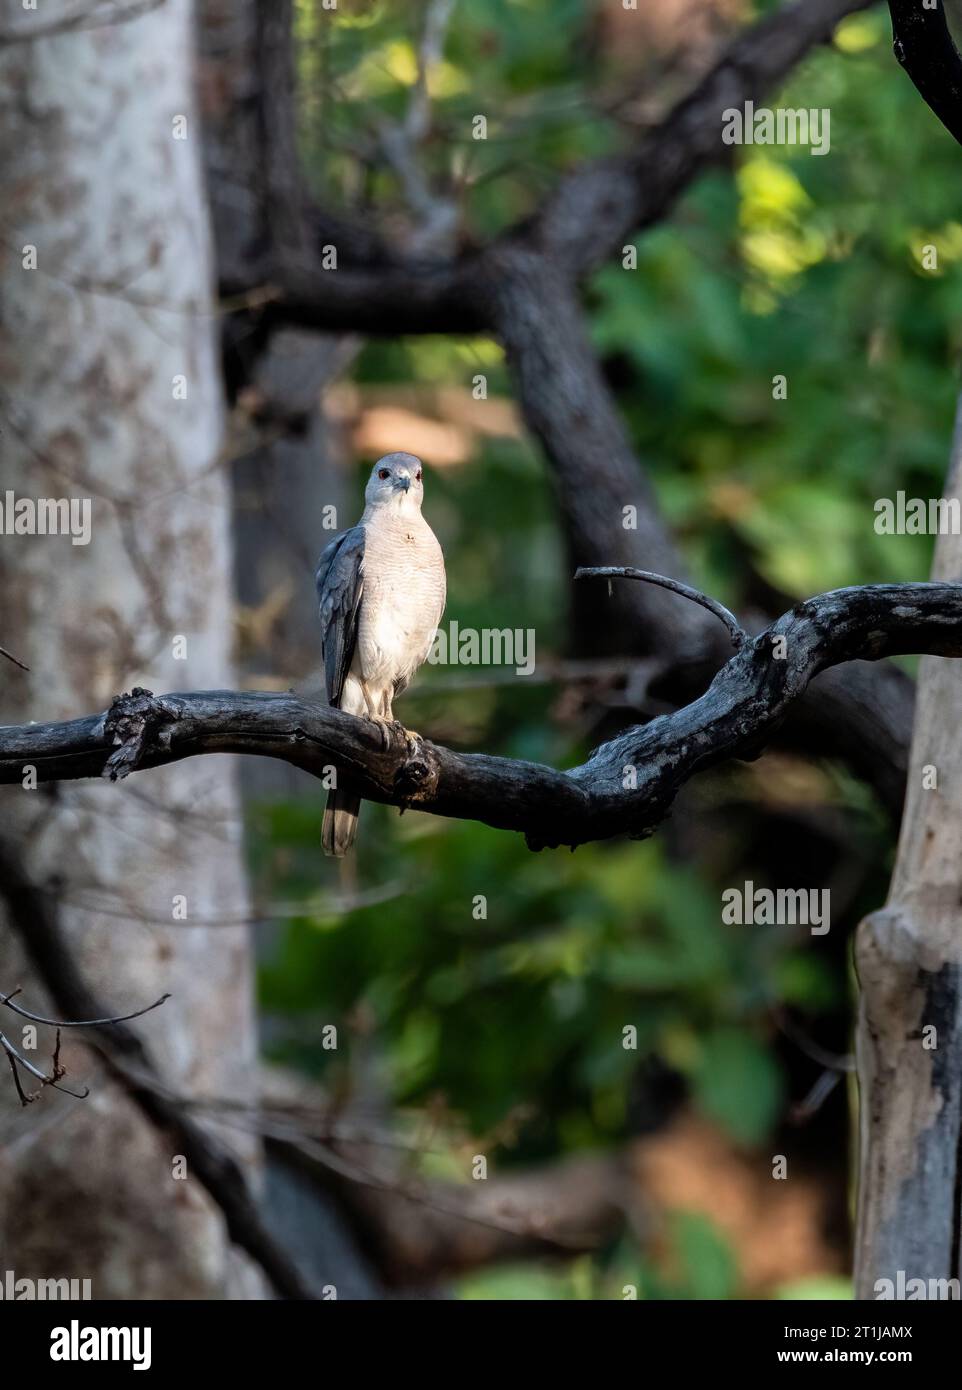 A Shikra bird perched on a tree branch inside Pench National Park during a wildlife safari Stock Photo